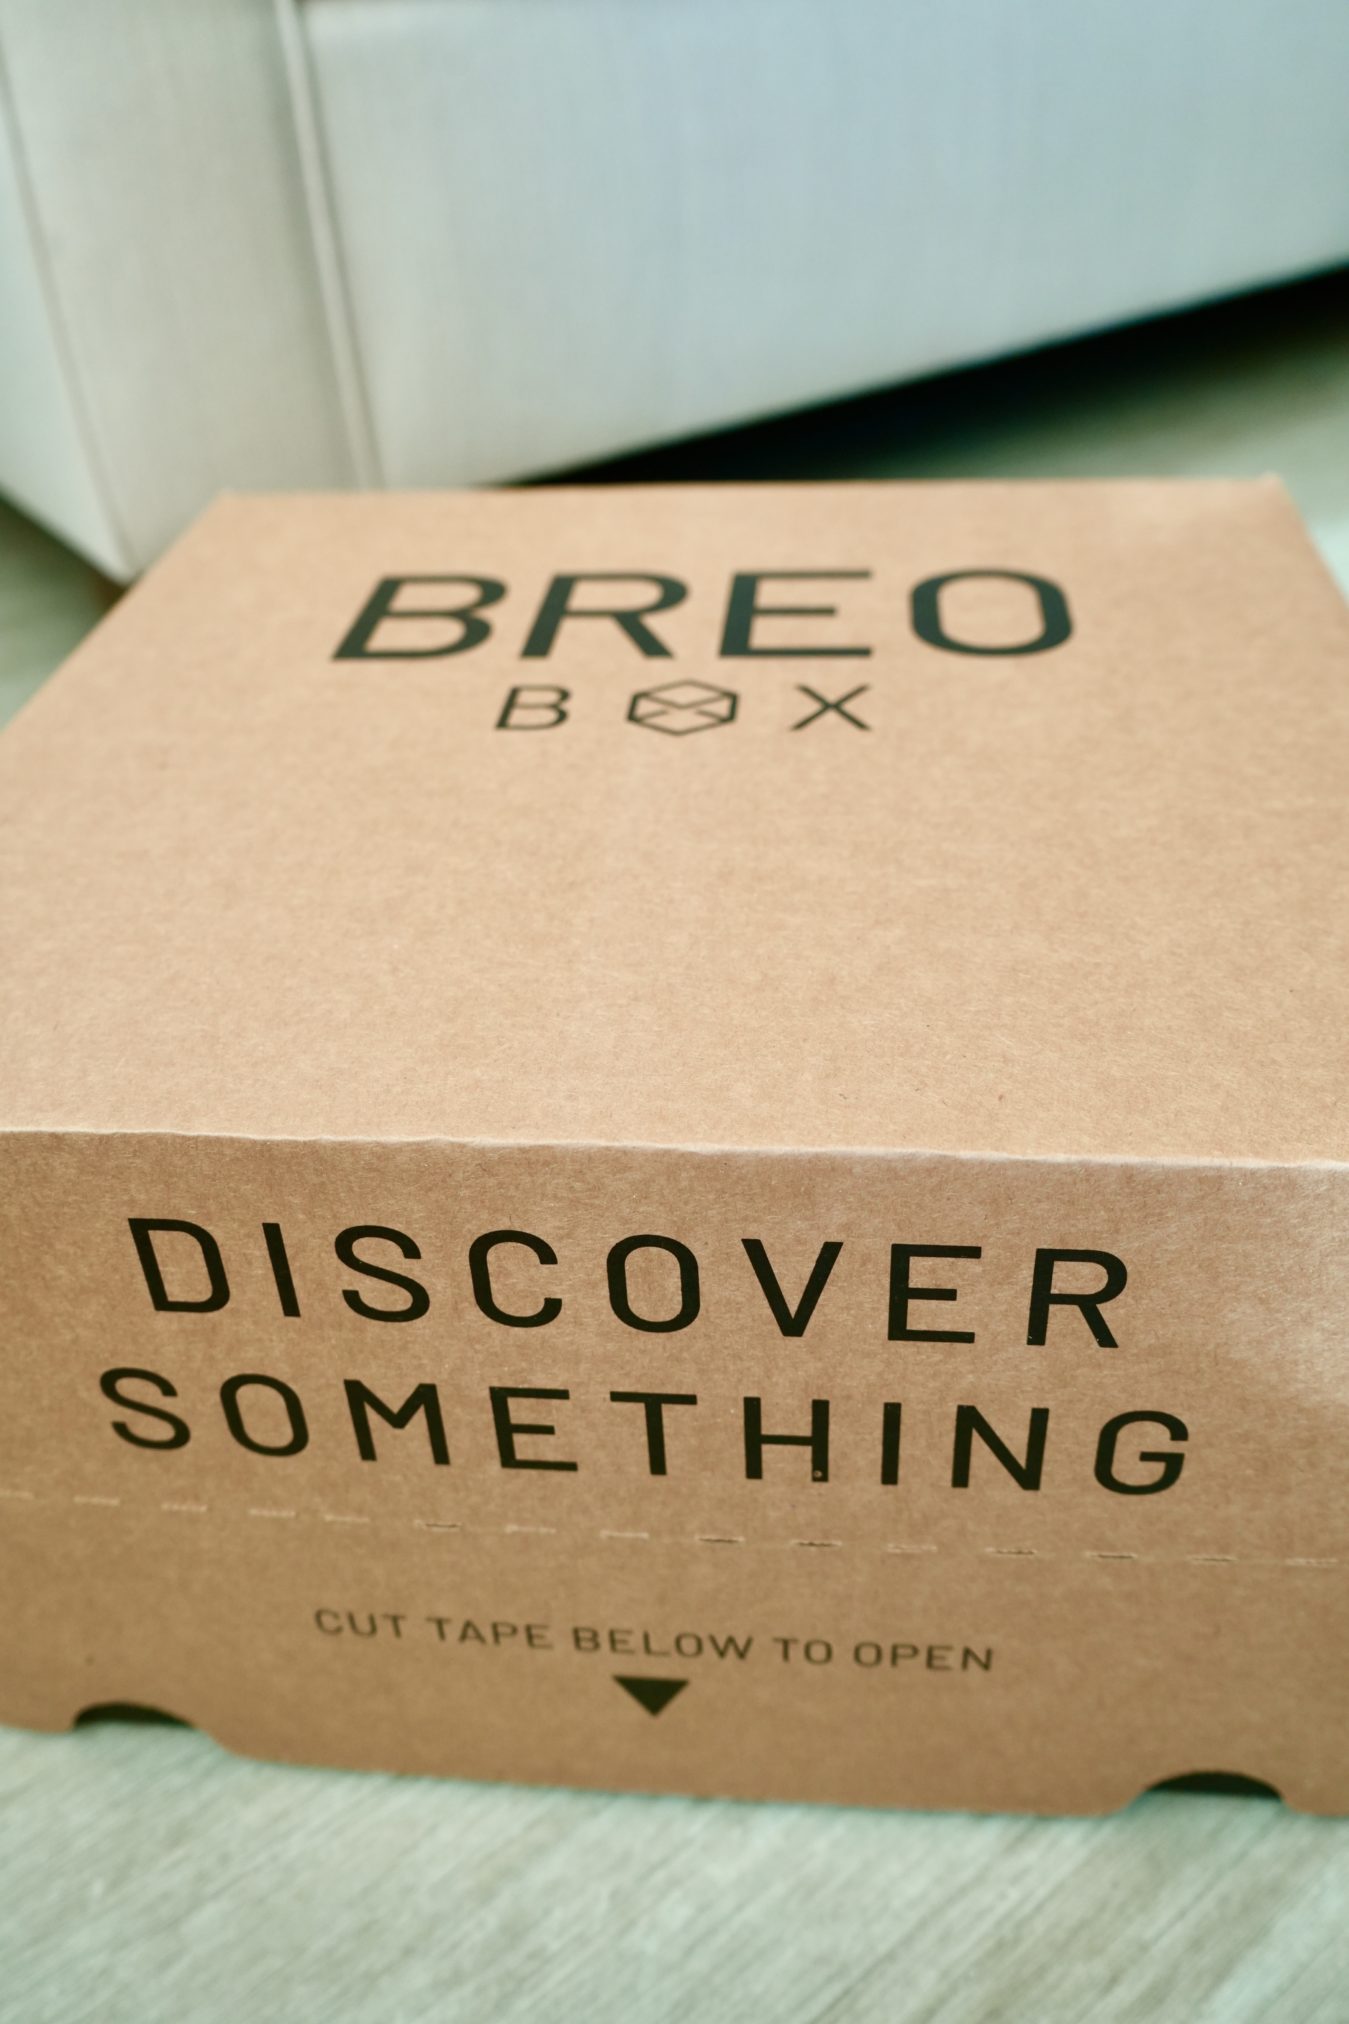 BREO Box Review Coolest Tech Subscription Or Waste Of Money